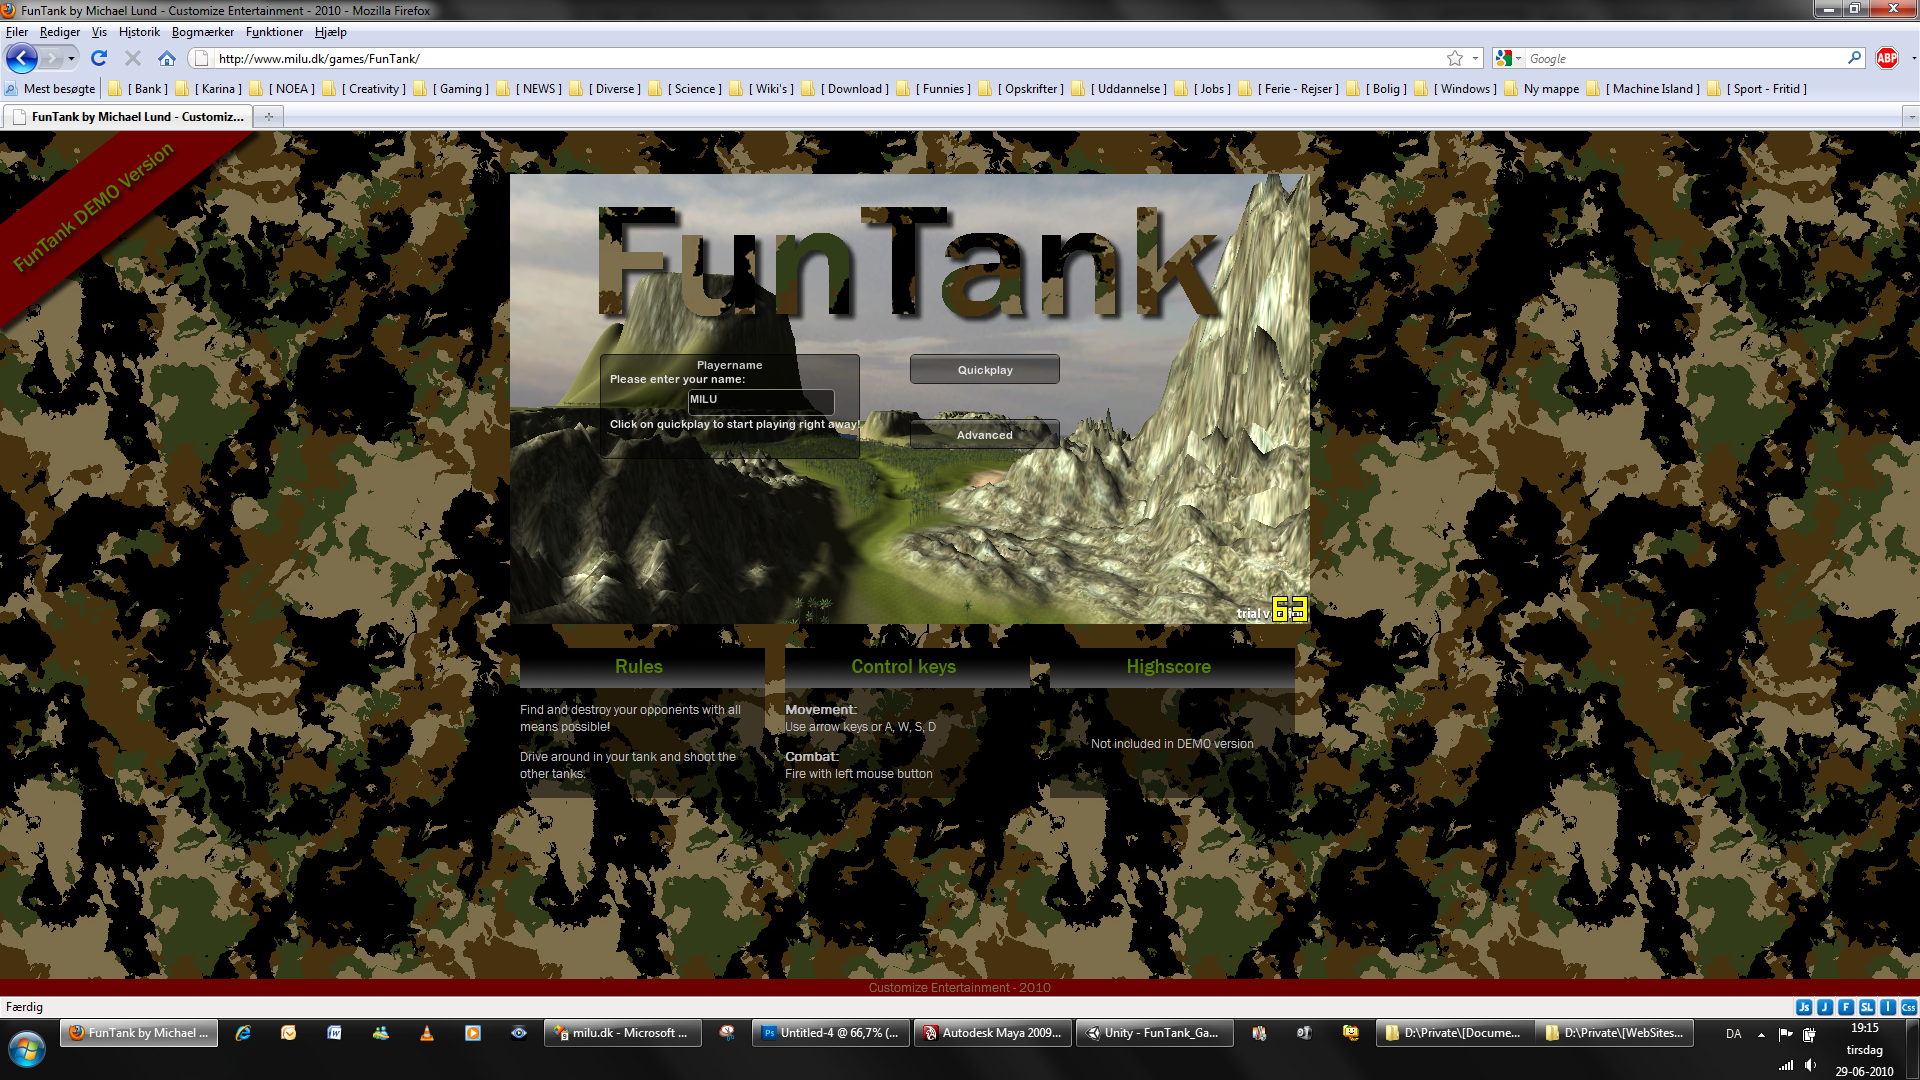 FunTank website running the game. Fullscreen is possible aswell